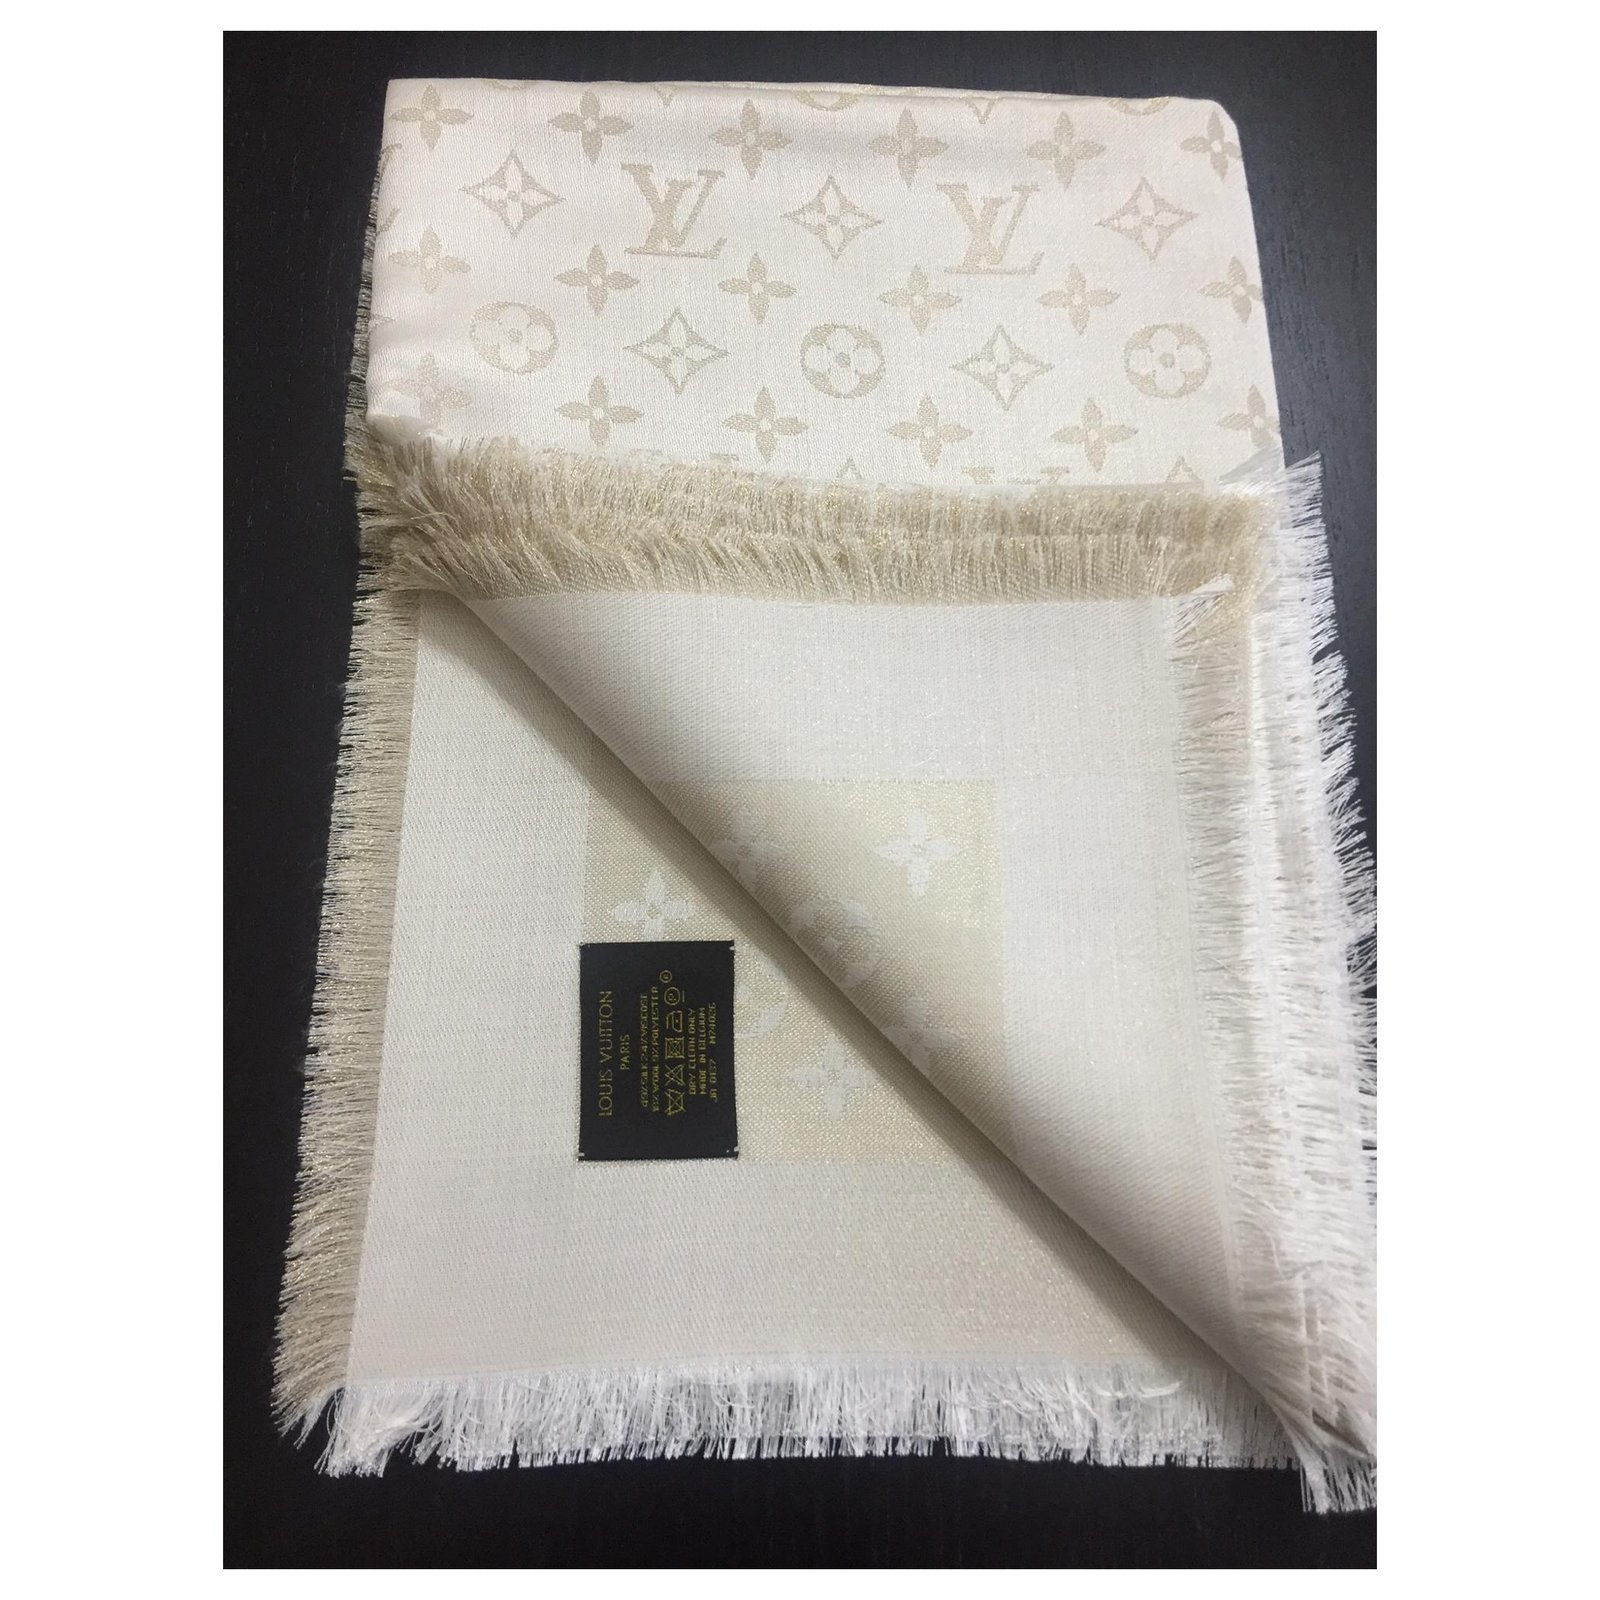 LOUIS VUITTON. Large off-white/cream silk and wool shawl in France